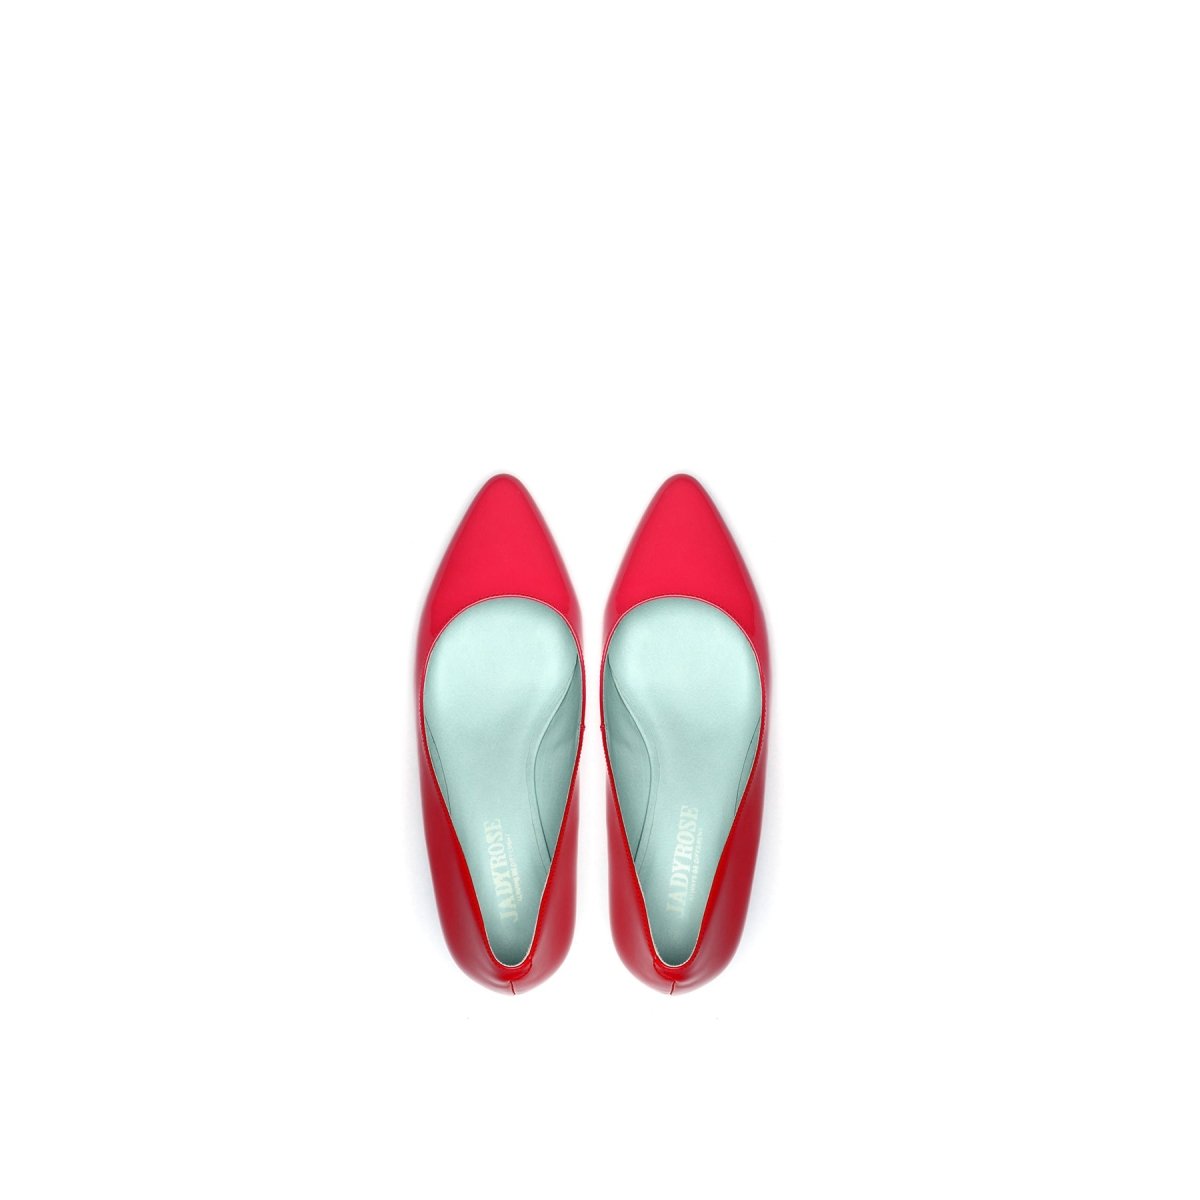 Coloring Ordinary Life Red Pumps - 0cm